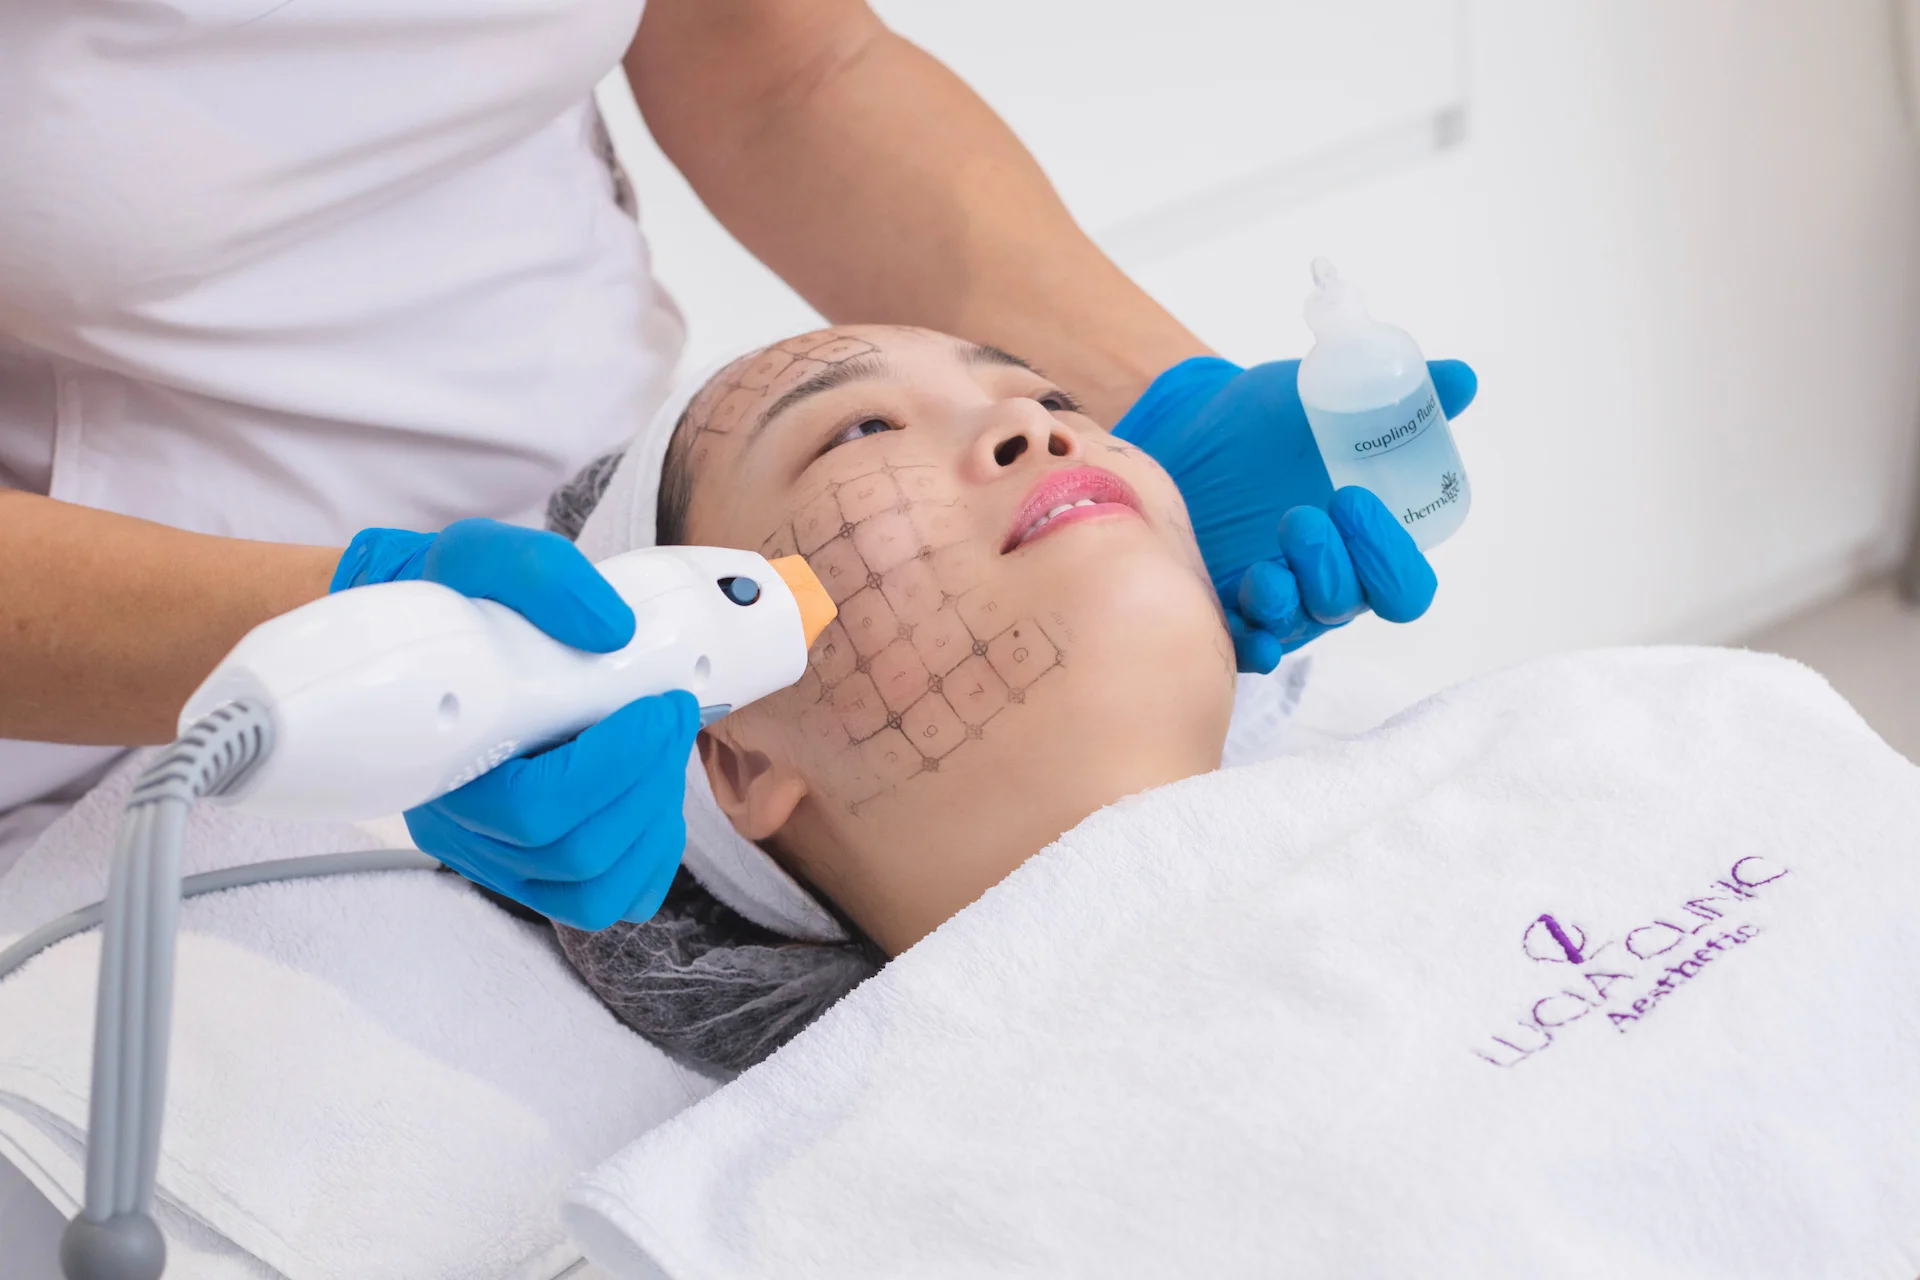 Thermage CPT for skin tightening and facial contouring - boost collagen level in the skin and smooth out wrinkles and fine lines for a more youthful appearance.